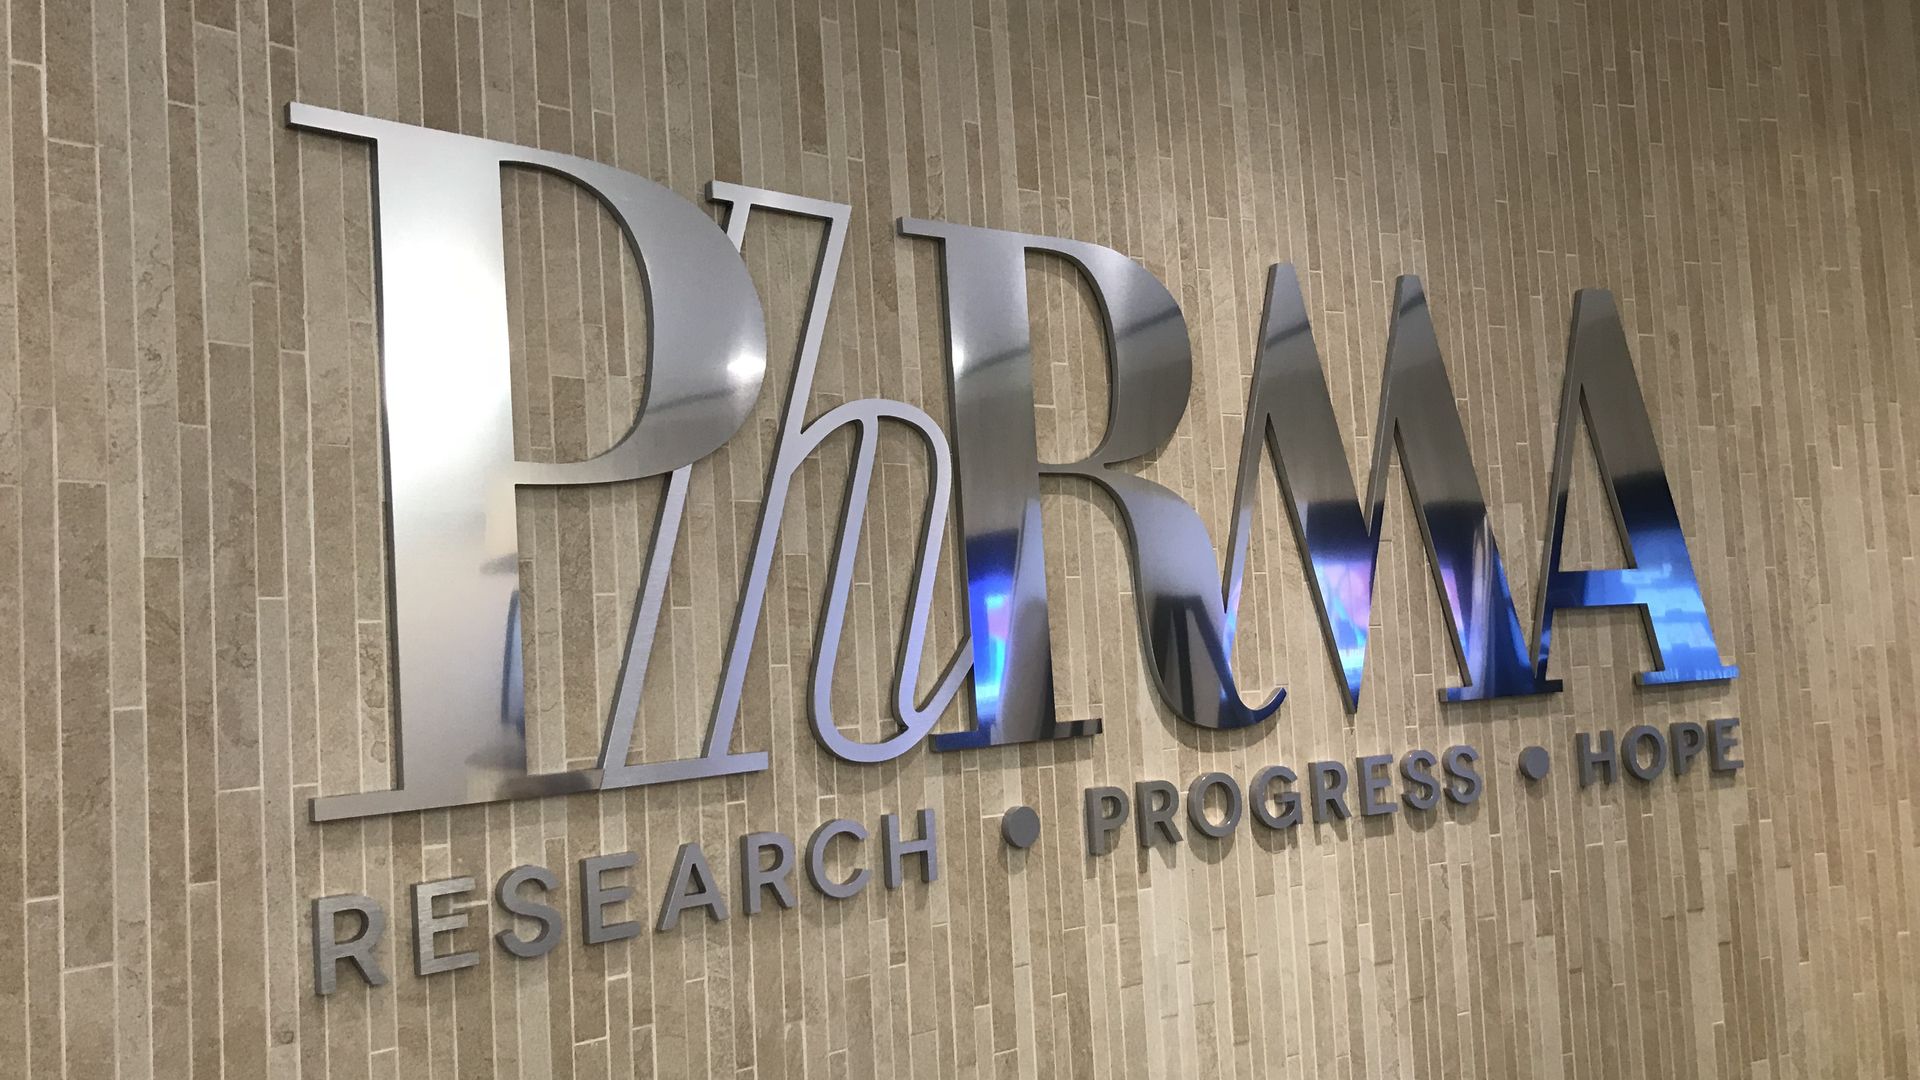 The PhRMA logo in the organization's D.C. office.